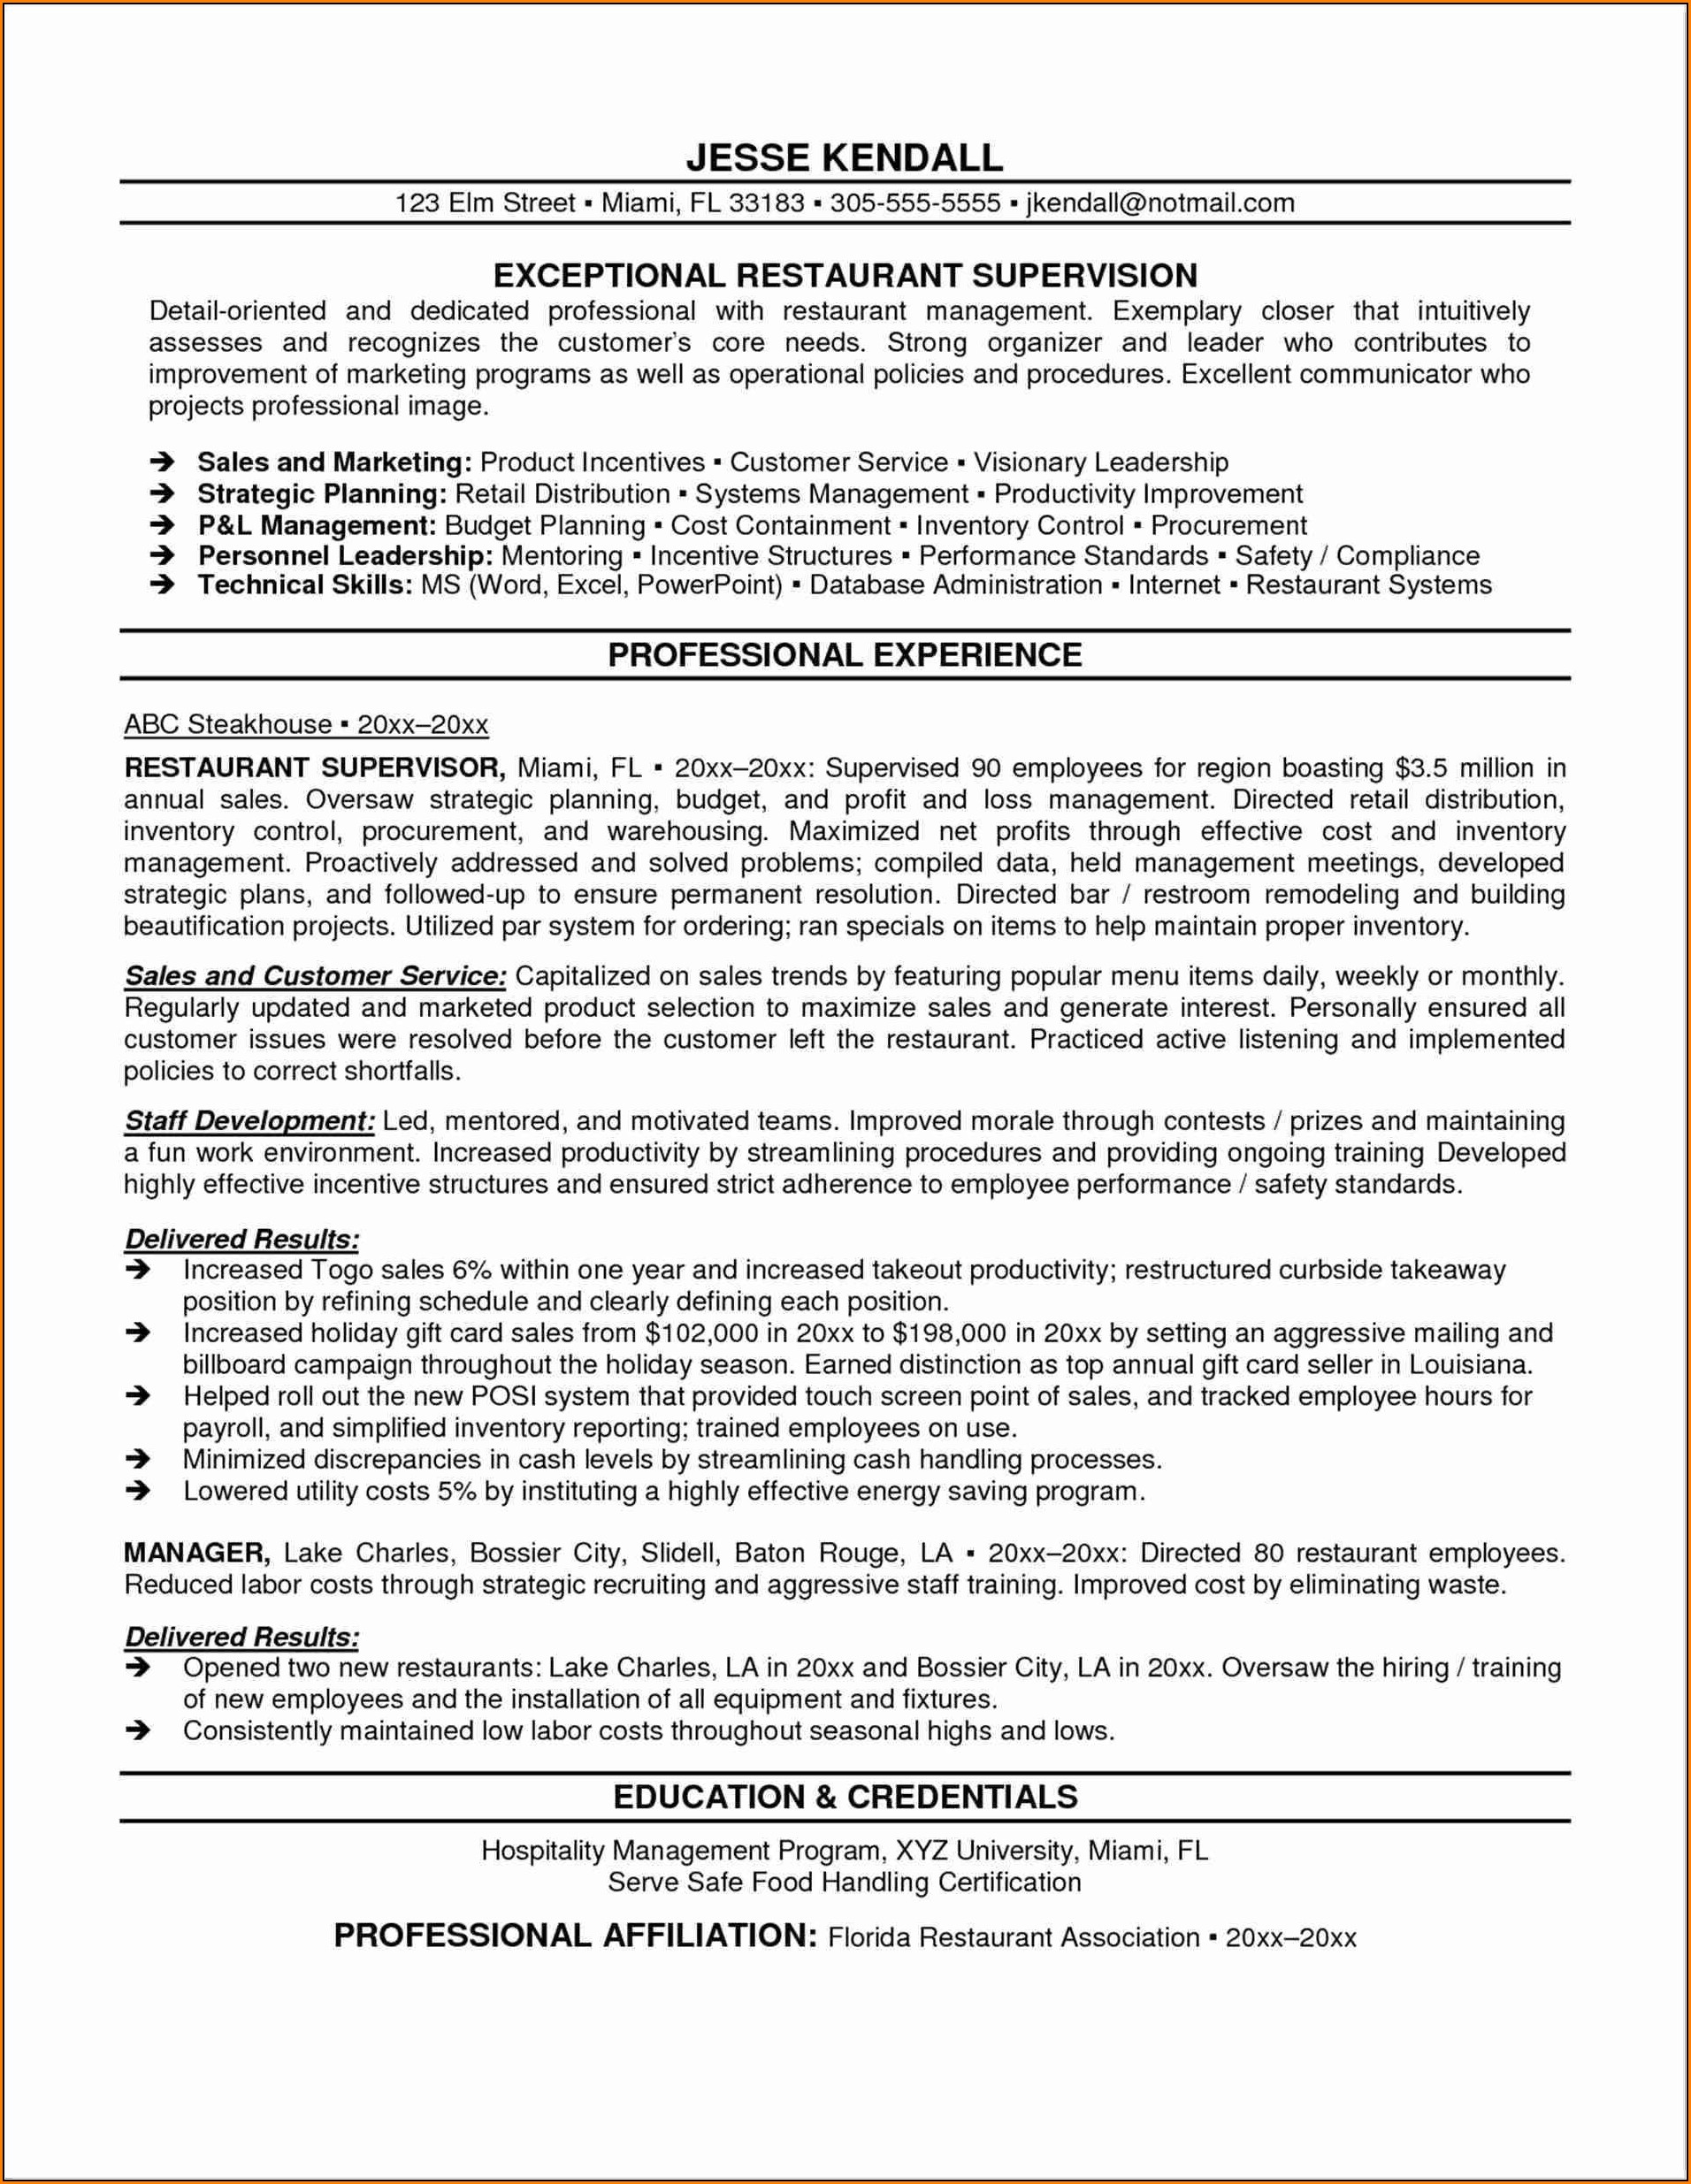 Mentoring Confidentiality Agreement Template